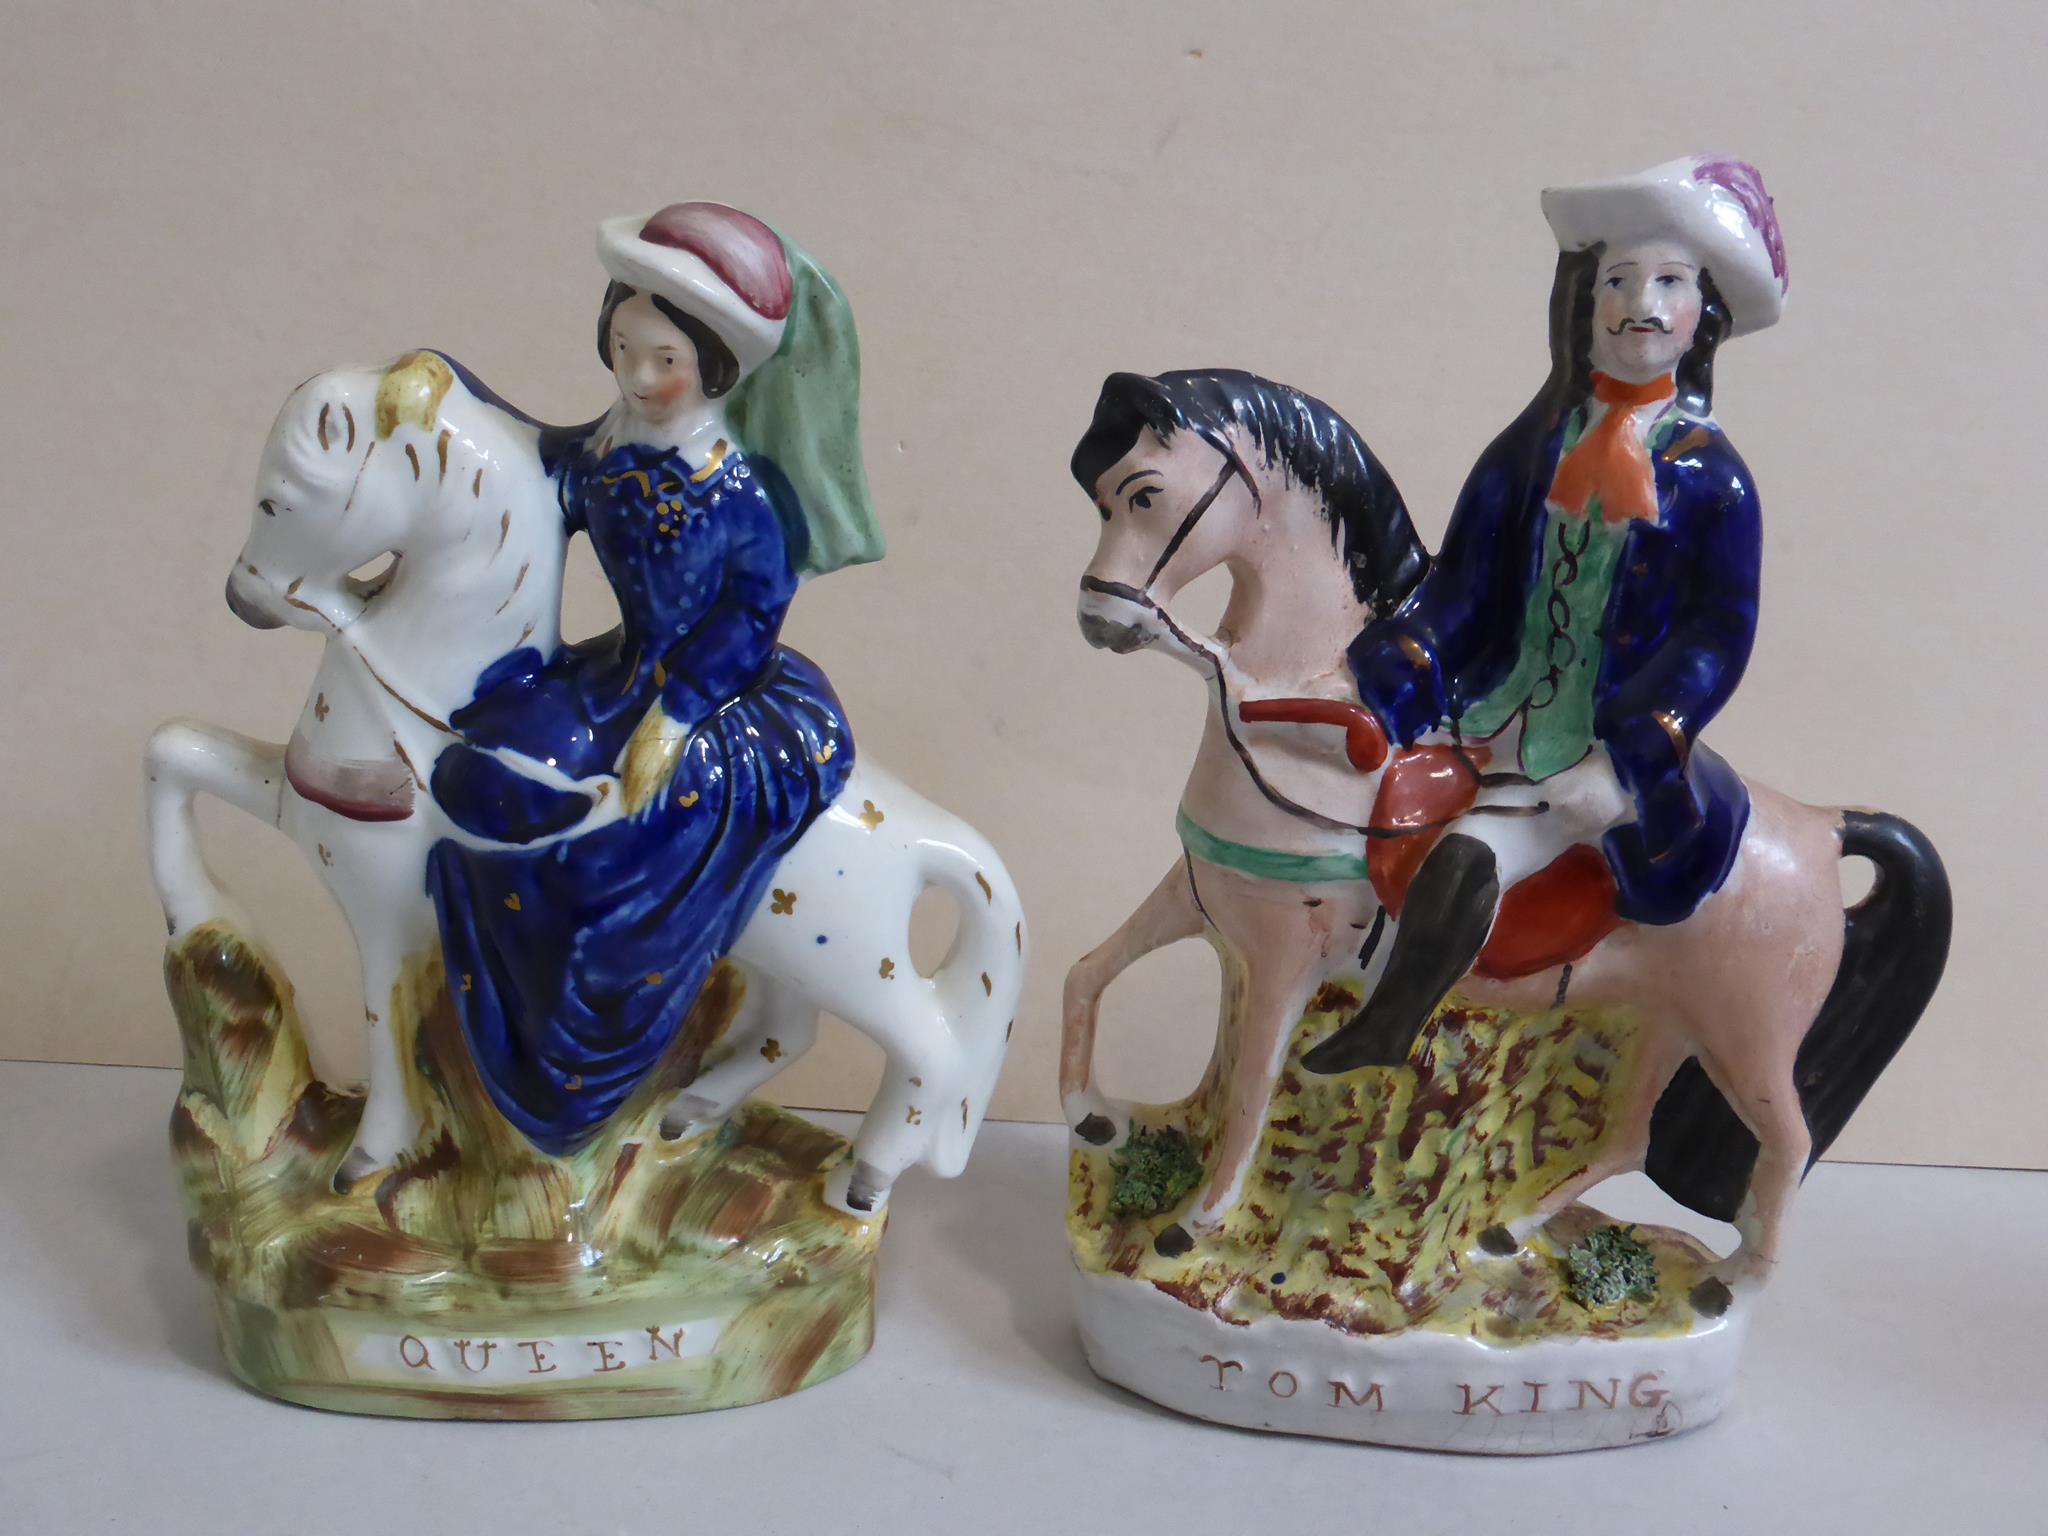 COLLECTION OF 19TH CENTURY STAFFORDSHIRE MOUNTED FIGURES INC. TOM KING, QUEEN, D.TURPIN, HAVELOCK - Image 2 of 4